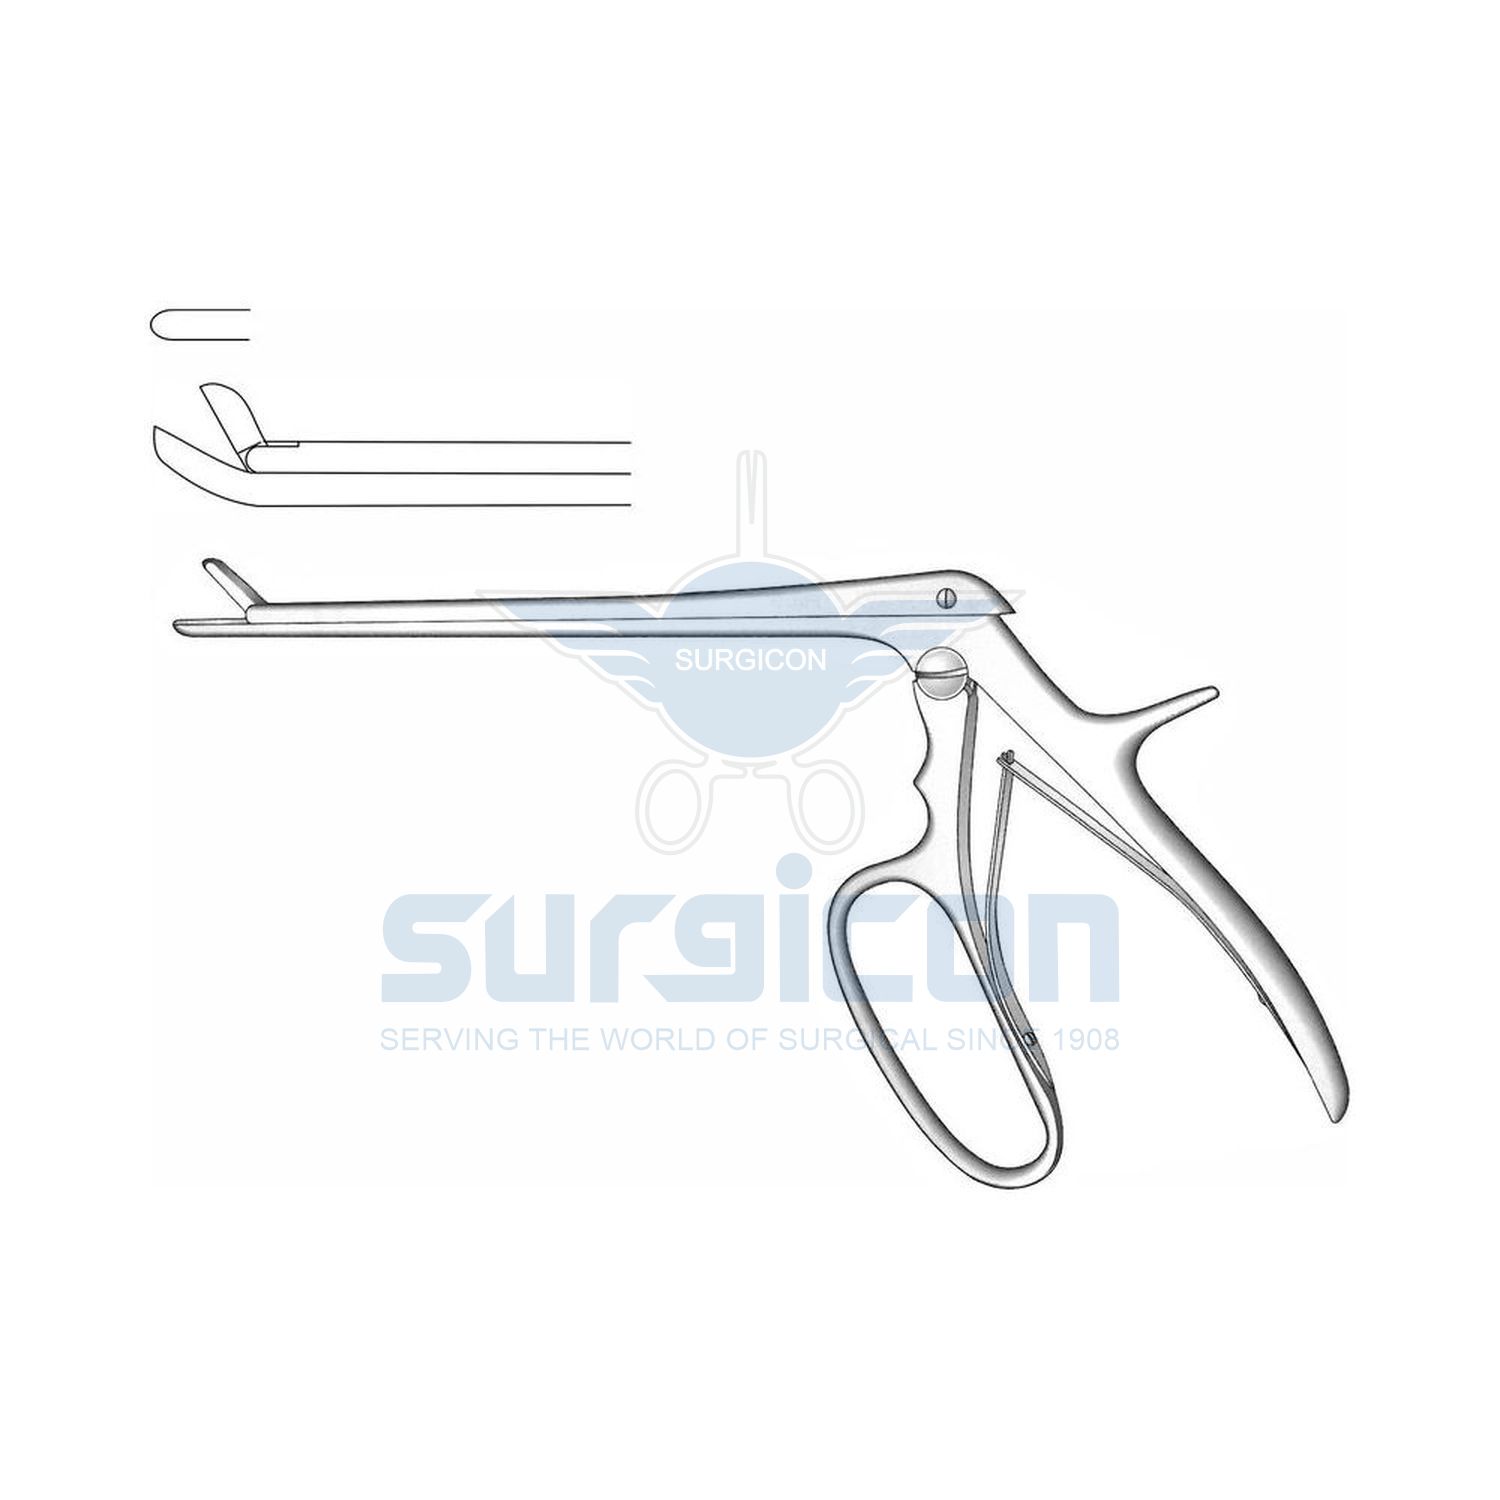 Ferris-Smith-Chusing-Punches-and-Rongeur-Forcep-J-32-1082